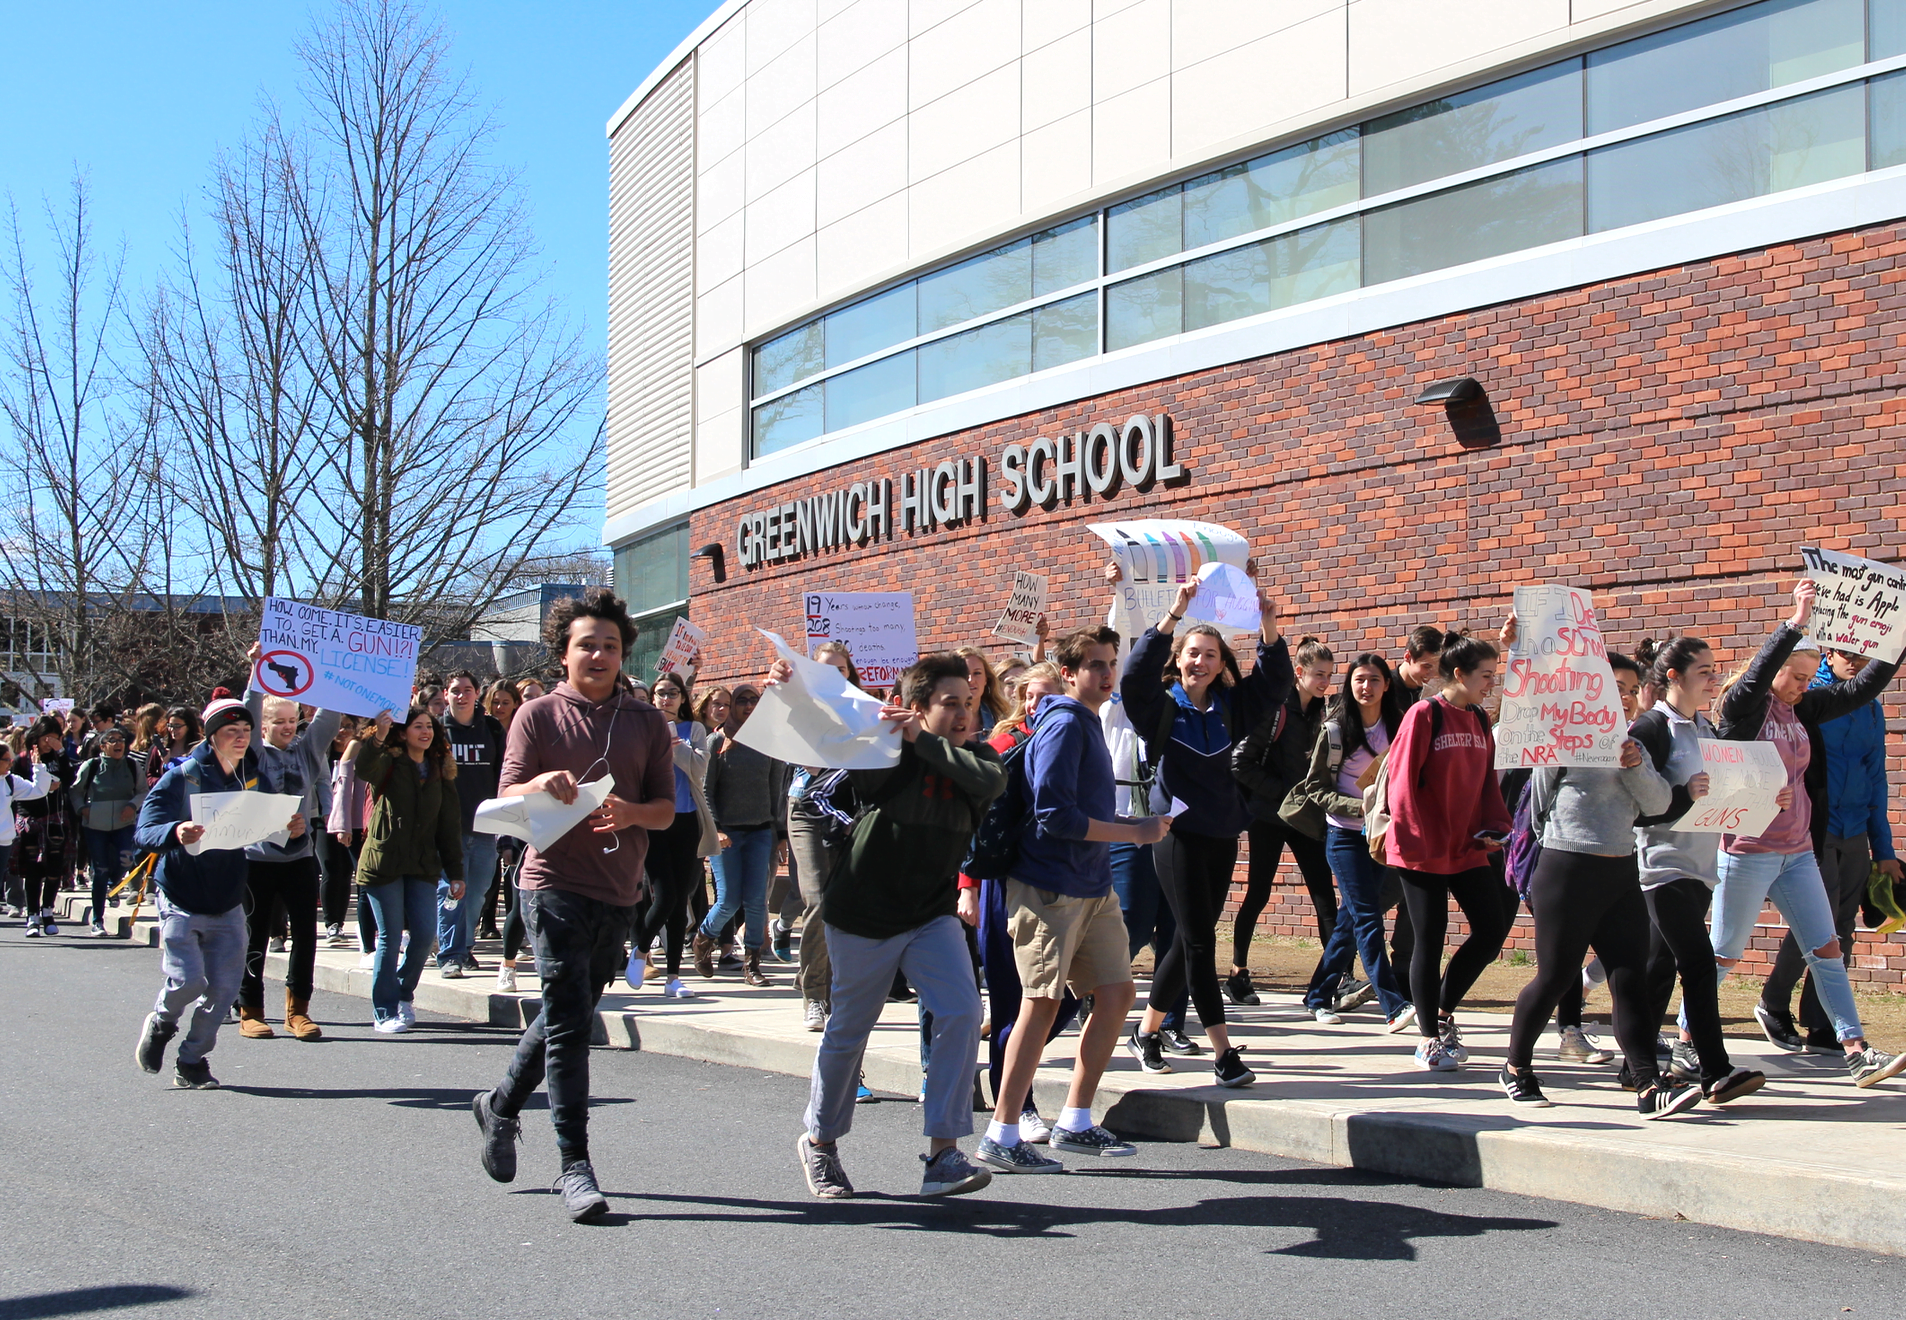 Students organized a walk out to protest gun violence on April 20, 2018 at Greenwich High School. Photo: Leslie Yager